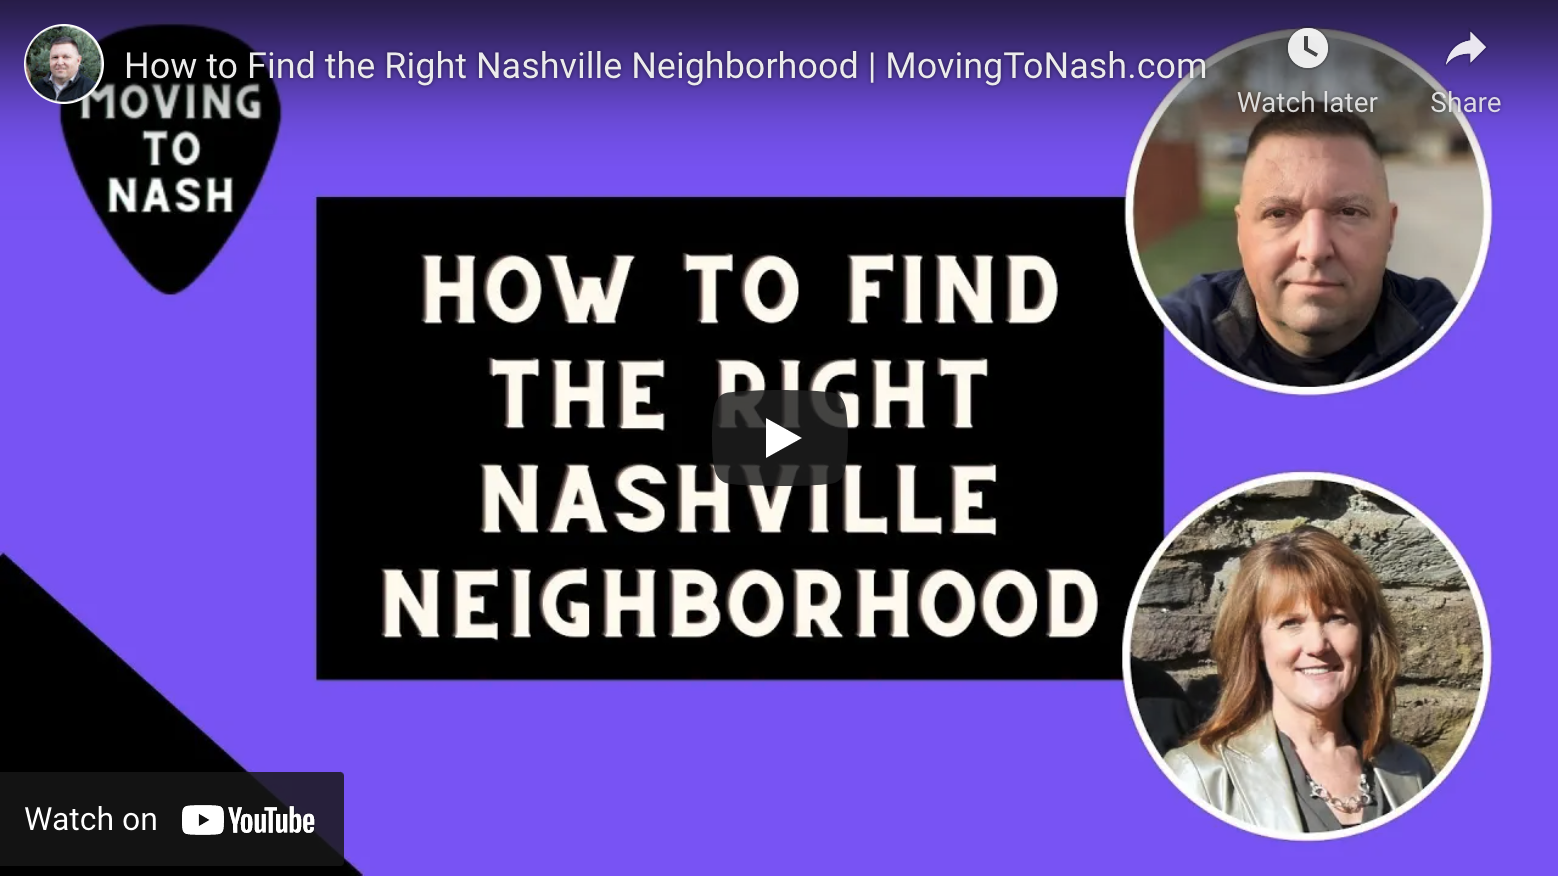 How to Find the Right Nashville Neighborhood for You